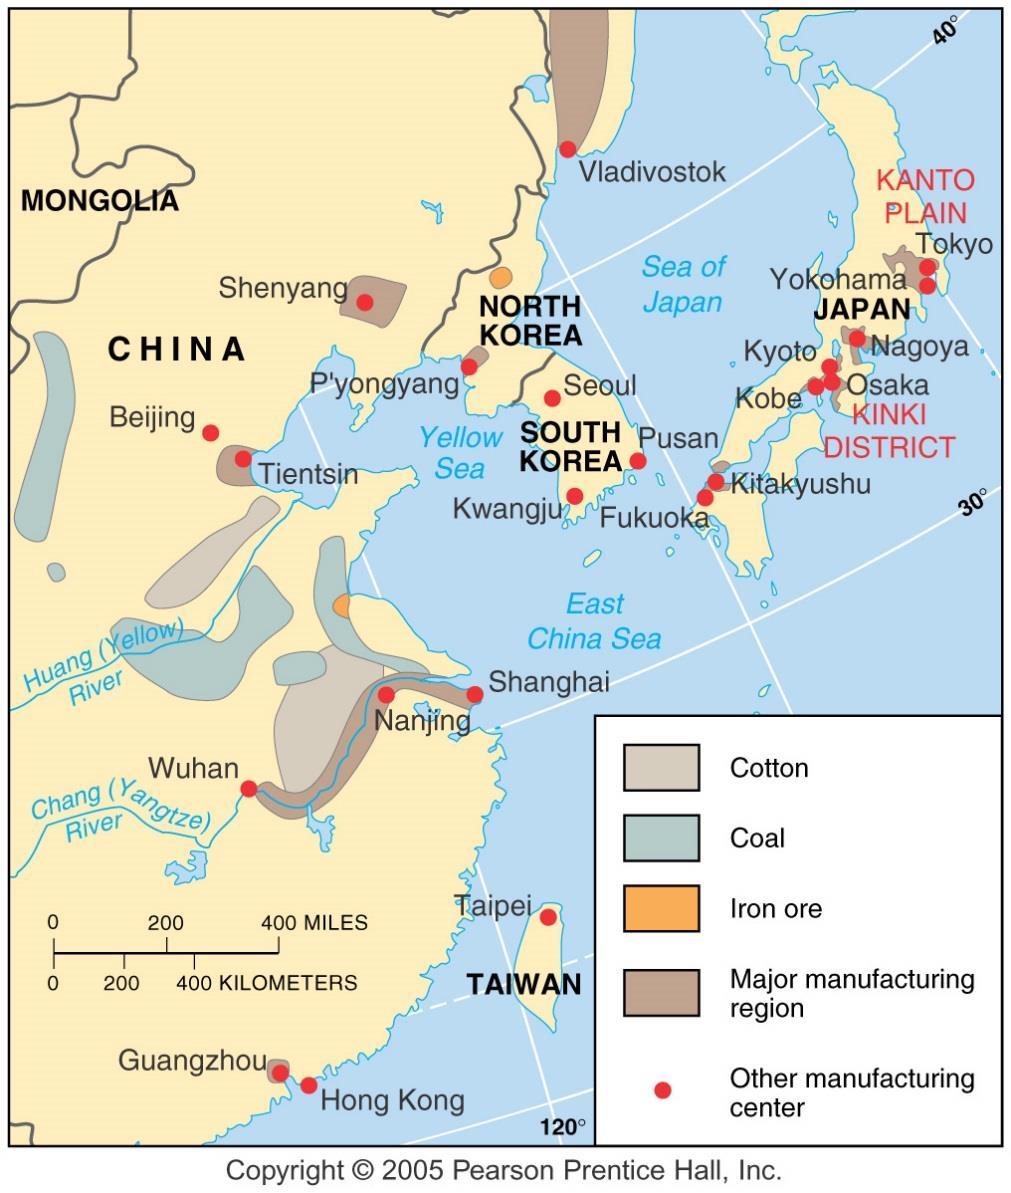 MANUFACTURING CENTERS IN EAST ASIA Many industries in China are clustered in three